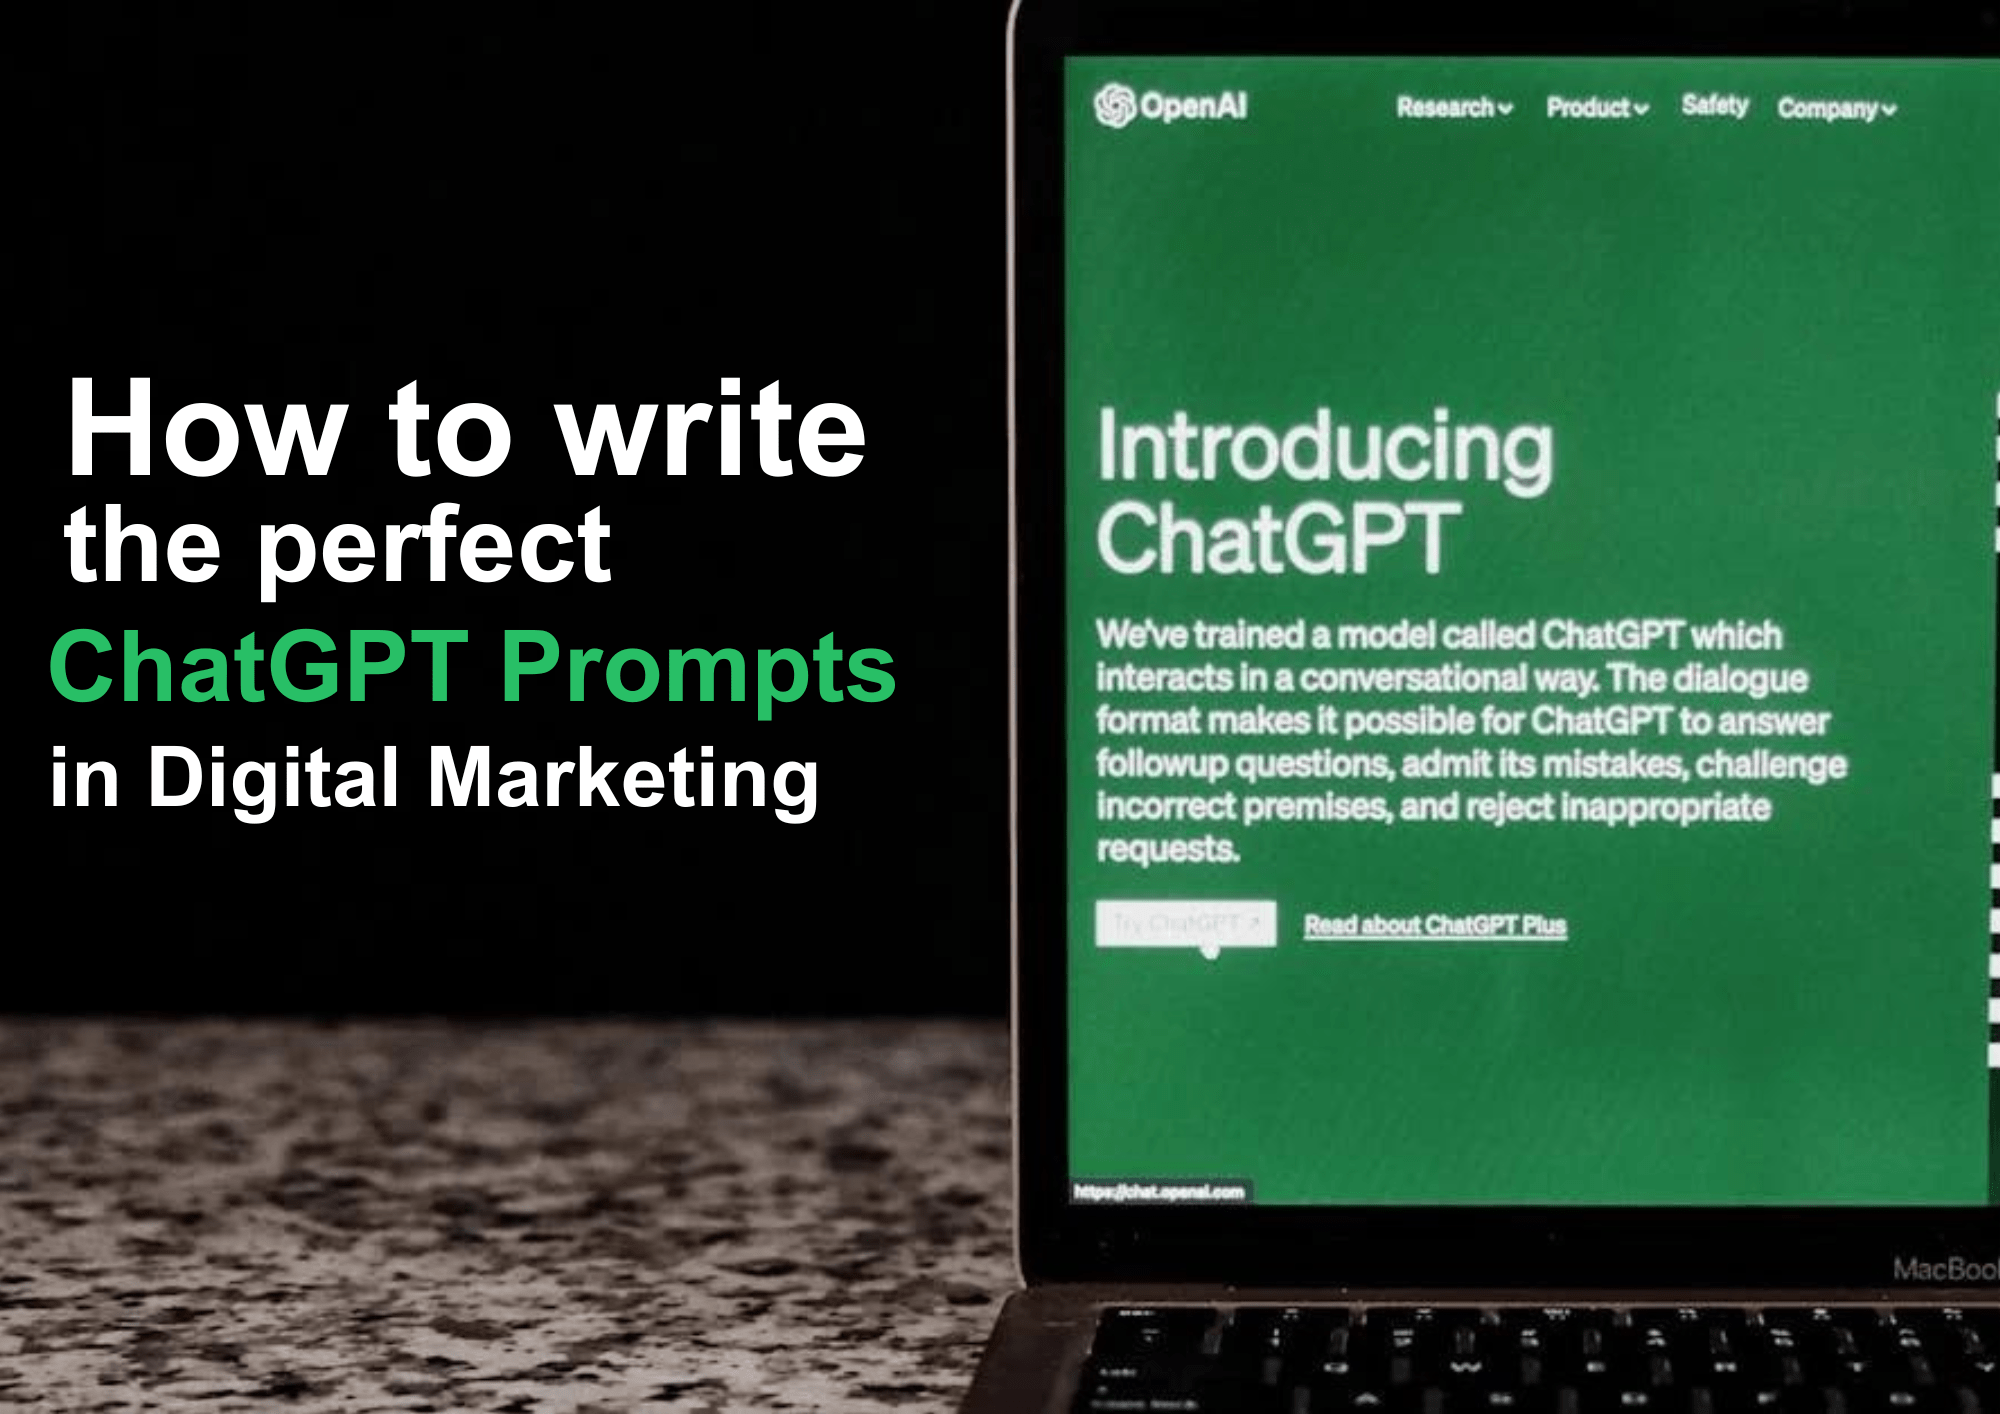 The image shows a laptop open on a webpage with a green background. The webpage displayed is from OpenAI, introducing ChatGPT. On the left side of the image, there is white text against a black background that reads “How to write the perfect ChatGPT Prompts in Digital Marketing”. The laptop is placed on a dark surface, possibly a table or countertop. The lighting in the image is dim and focused mainly on the laptop screen and text to its left. The text on the laptop screen reads, “Introducing ChatGPT. We’ve trained a model called ChatGPT which interacts in a conversational way. The dialogue format makes it possible for ChatGPT to answer followup questions, admit its mistakes, challenge incorrect premises, and reject inappropriate requests.”